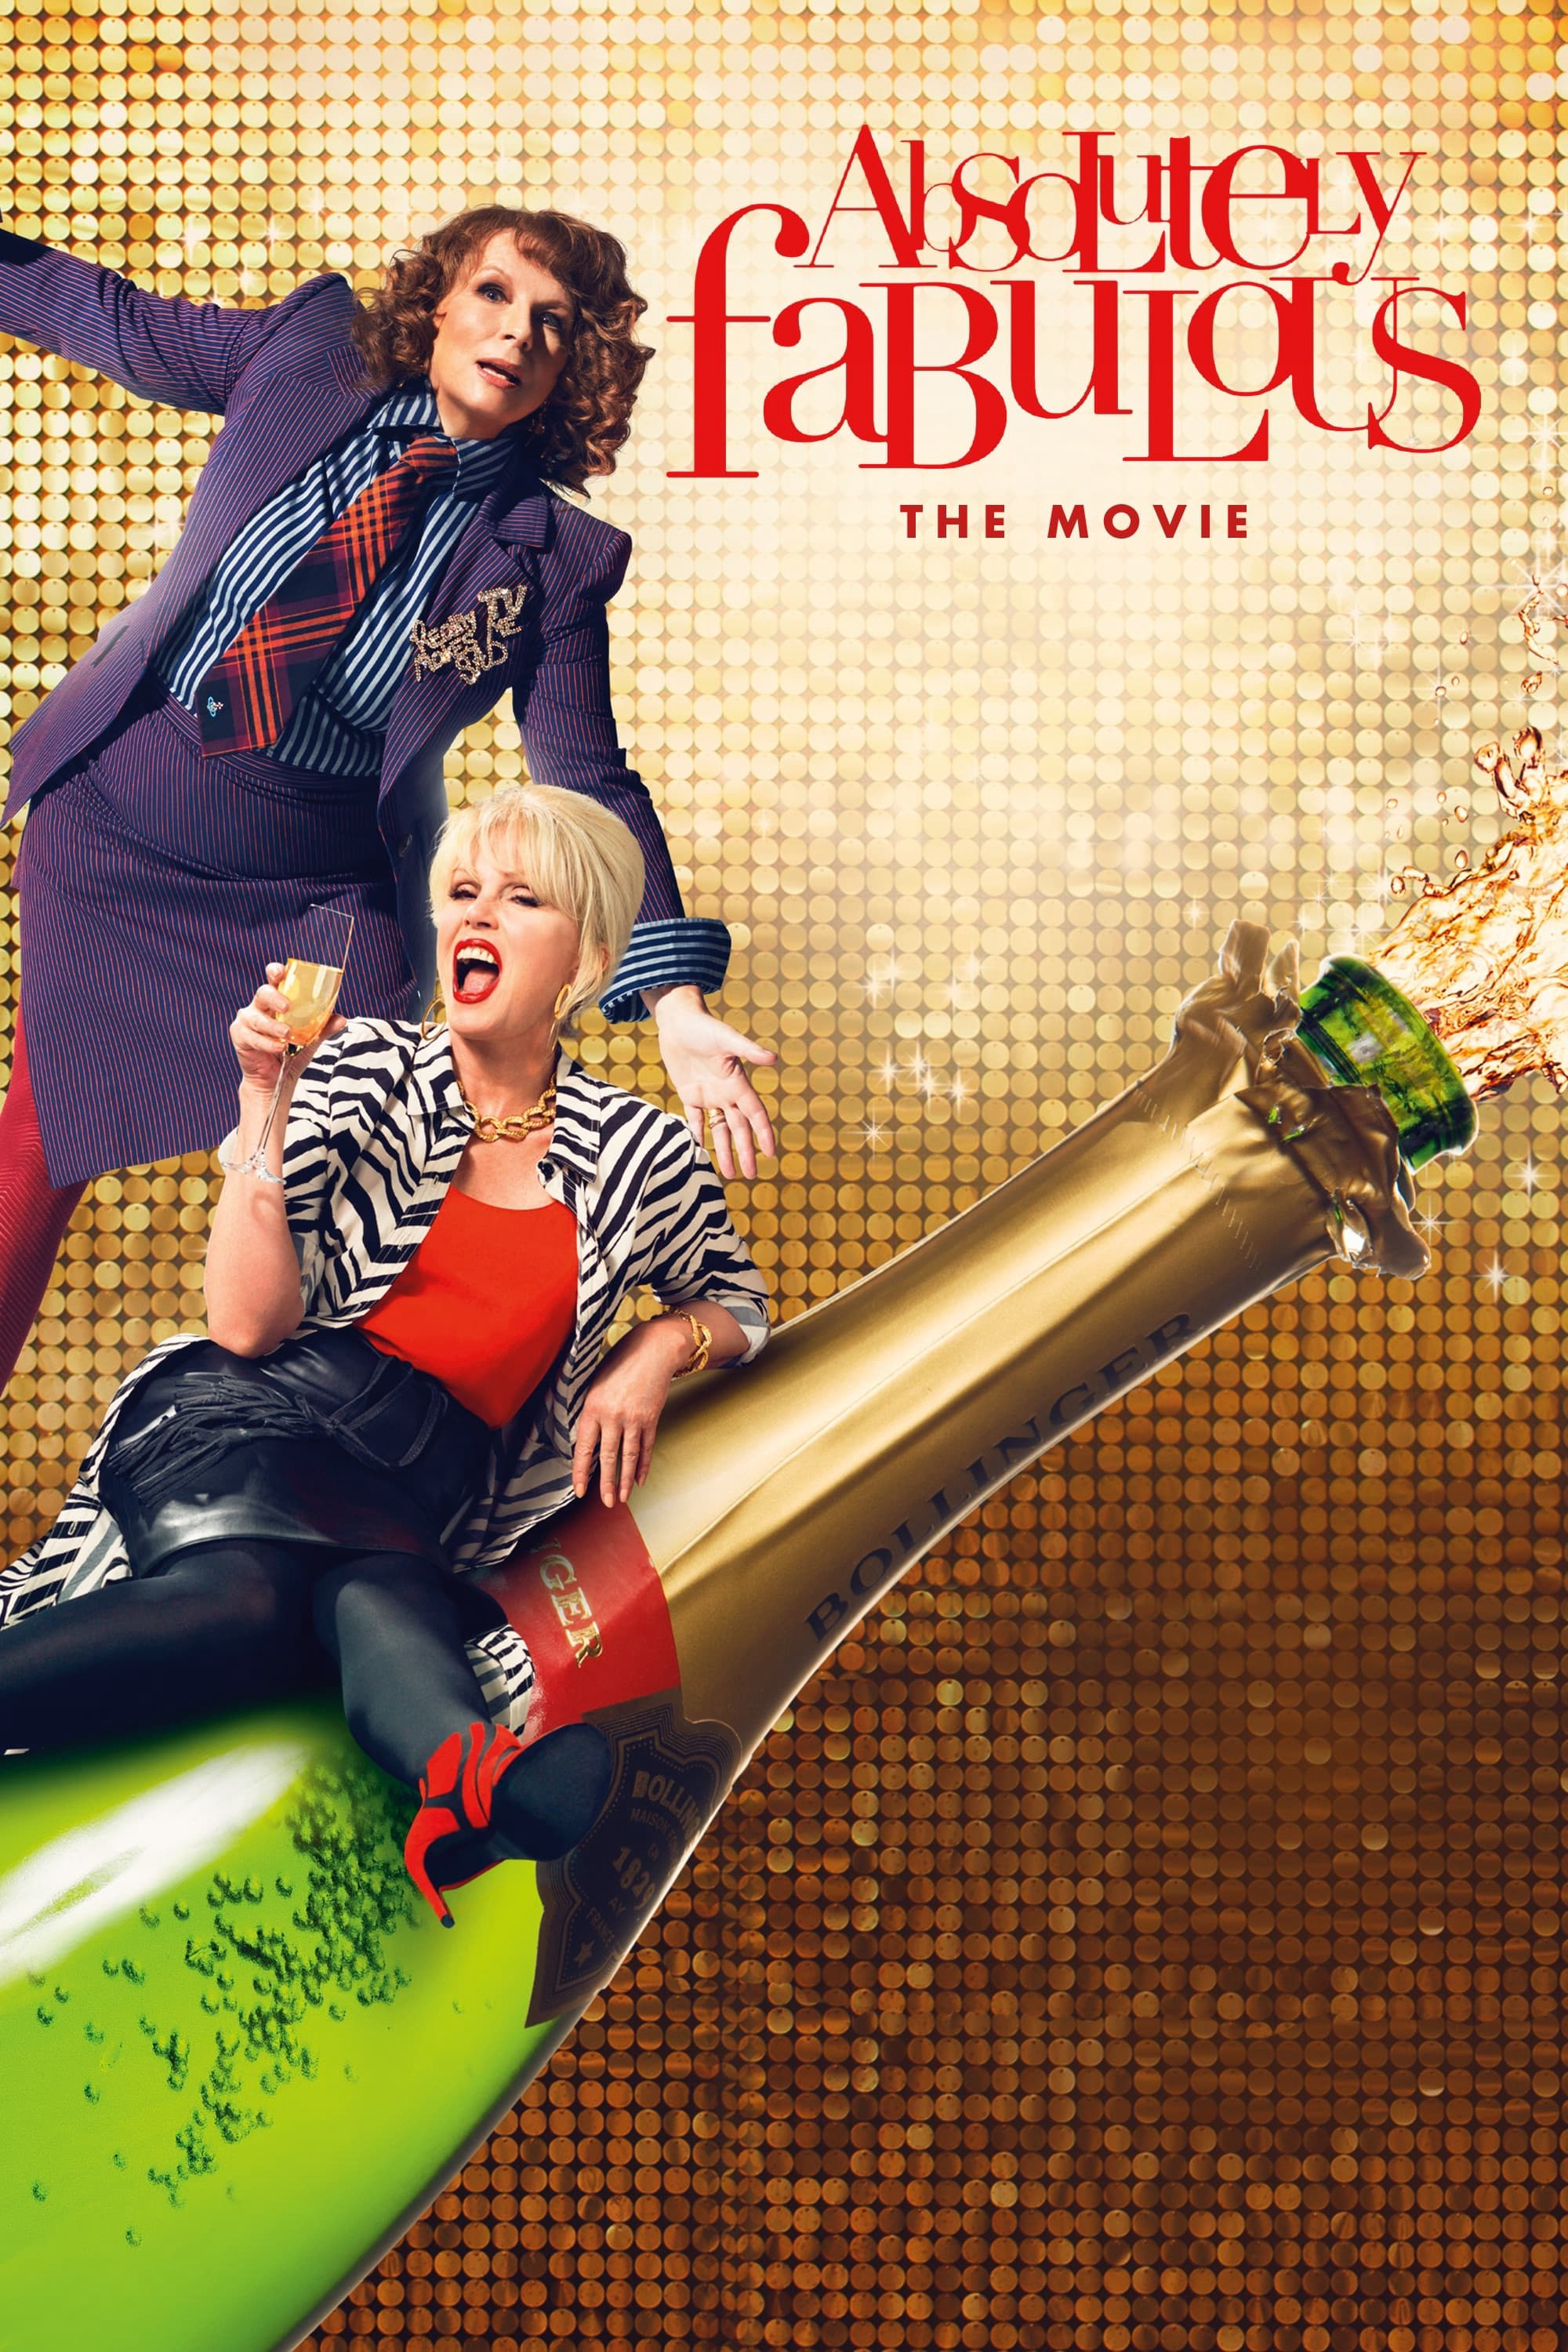 Poster Phim Tột Cùng Sang Chảnh (Absolutely Fabulous: The Movie)